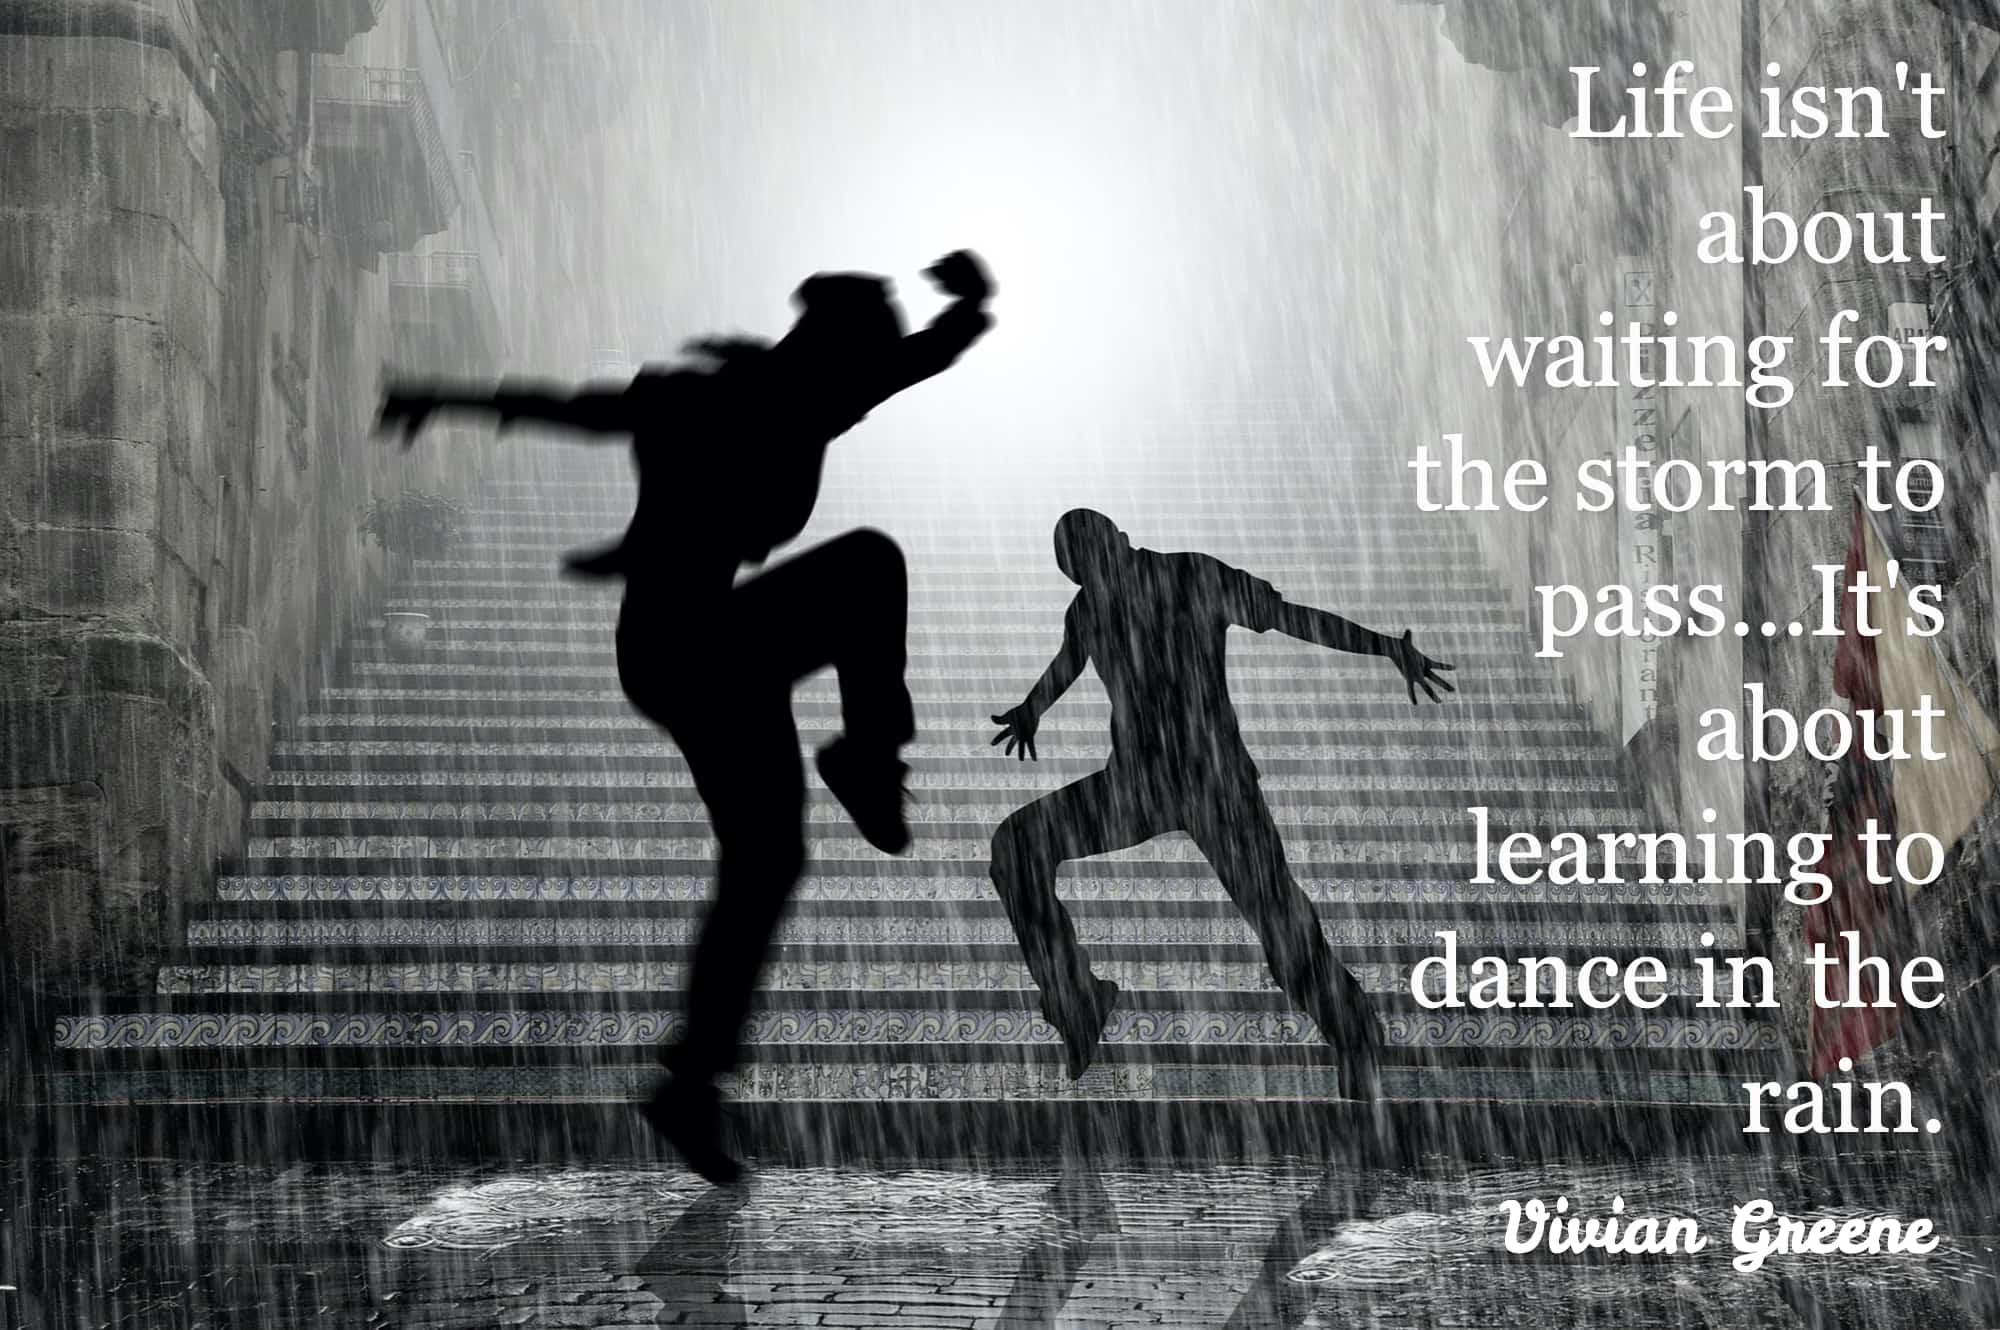 Life isn't about waiting for the storm to pass. It's about learning to dance in the rain, Quote by Vivian Greene